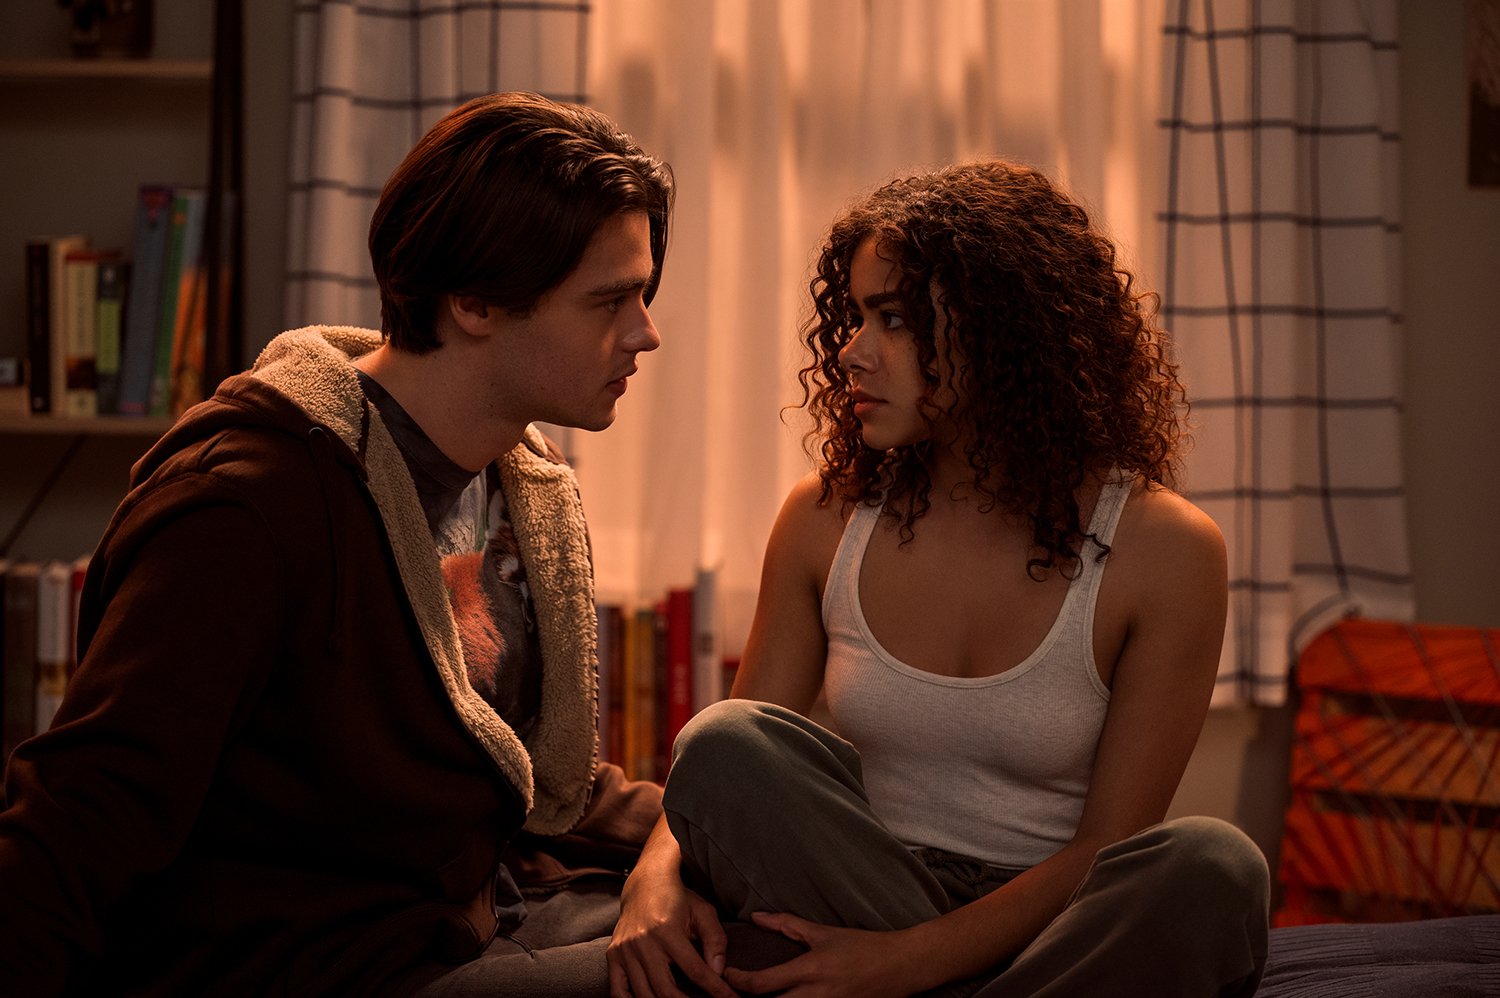 Felix Mallard as Marcus Baker and Antonia Gentry as Georgia Miller sitting on Ginny's bed together in Ginny & Georgia Season 2